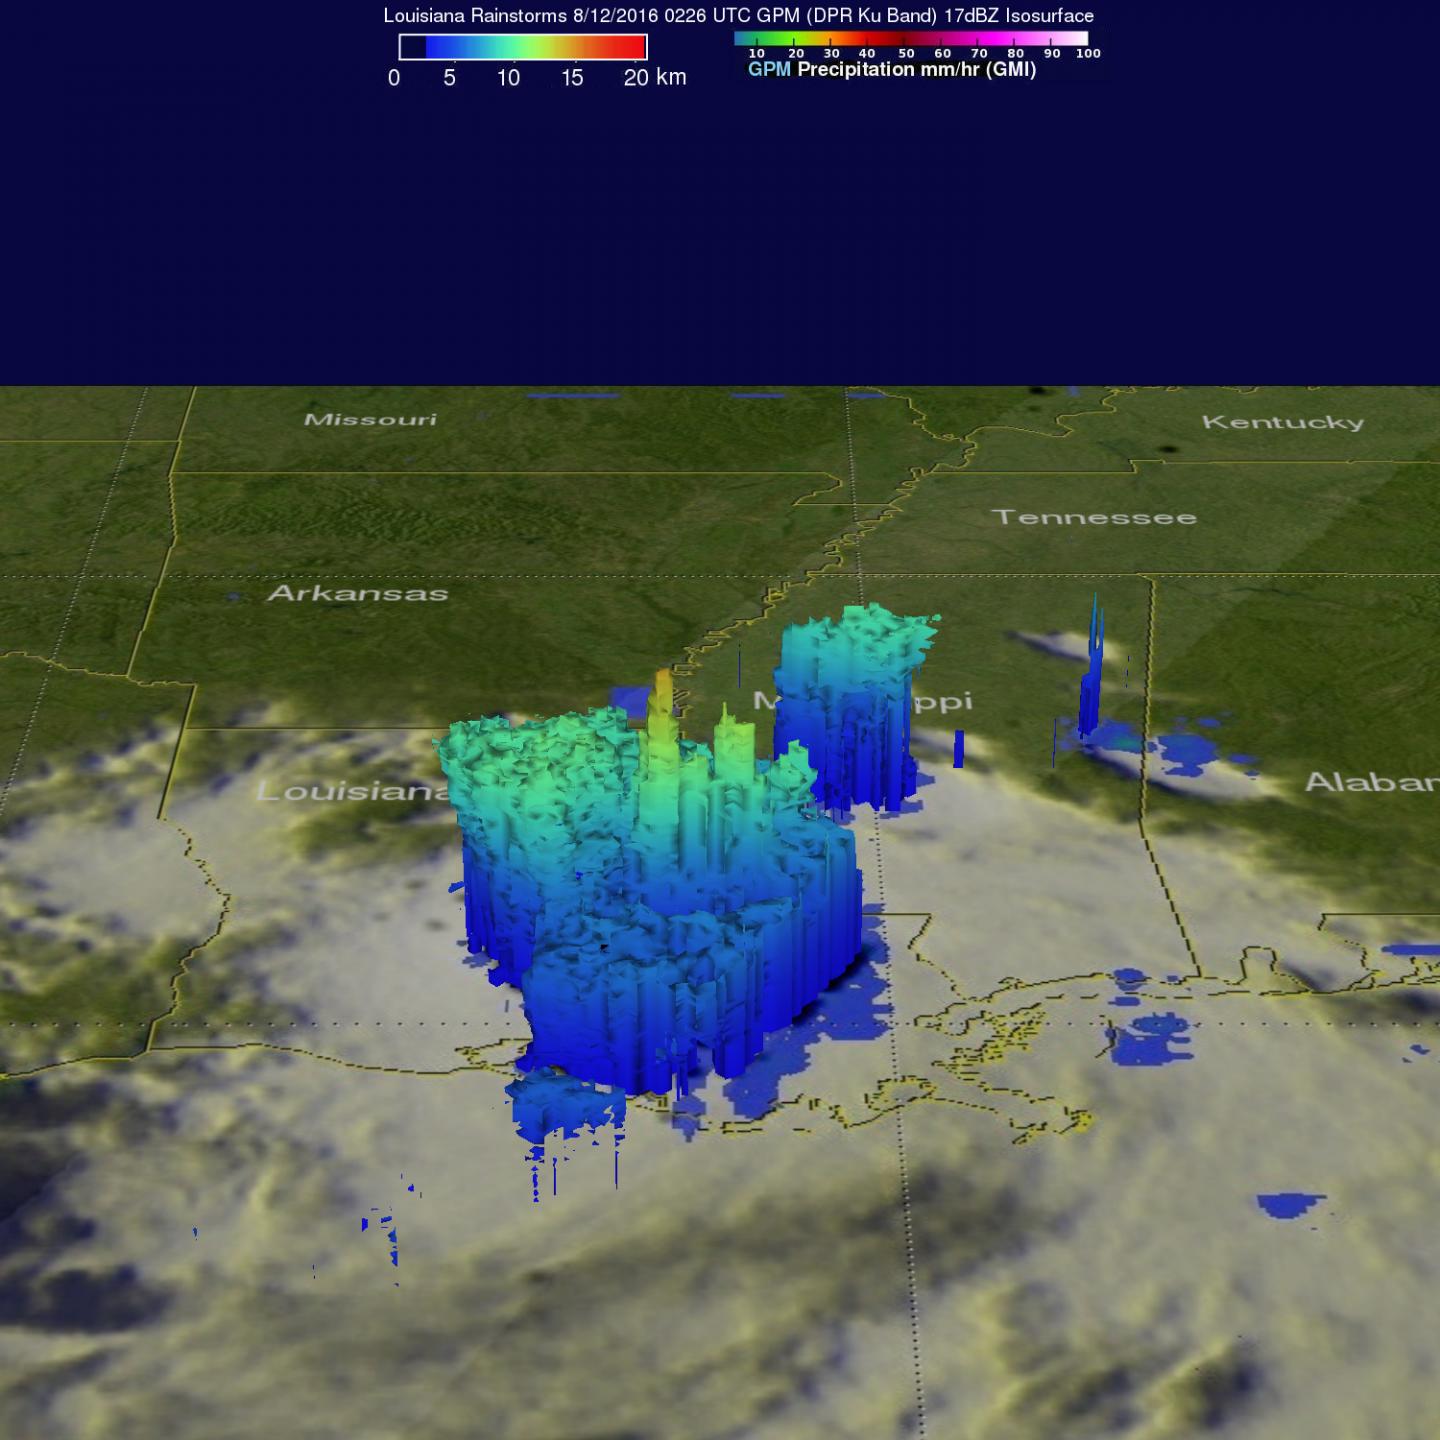 Rainfall Measurements from GPM